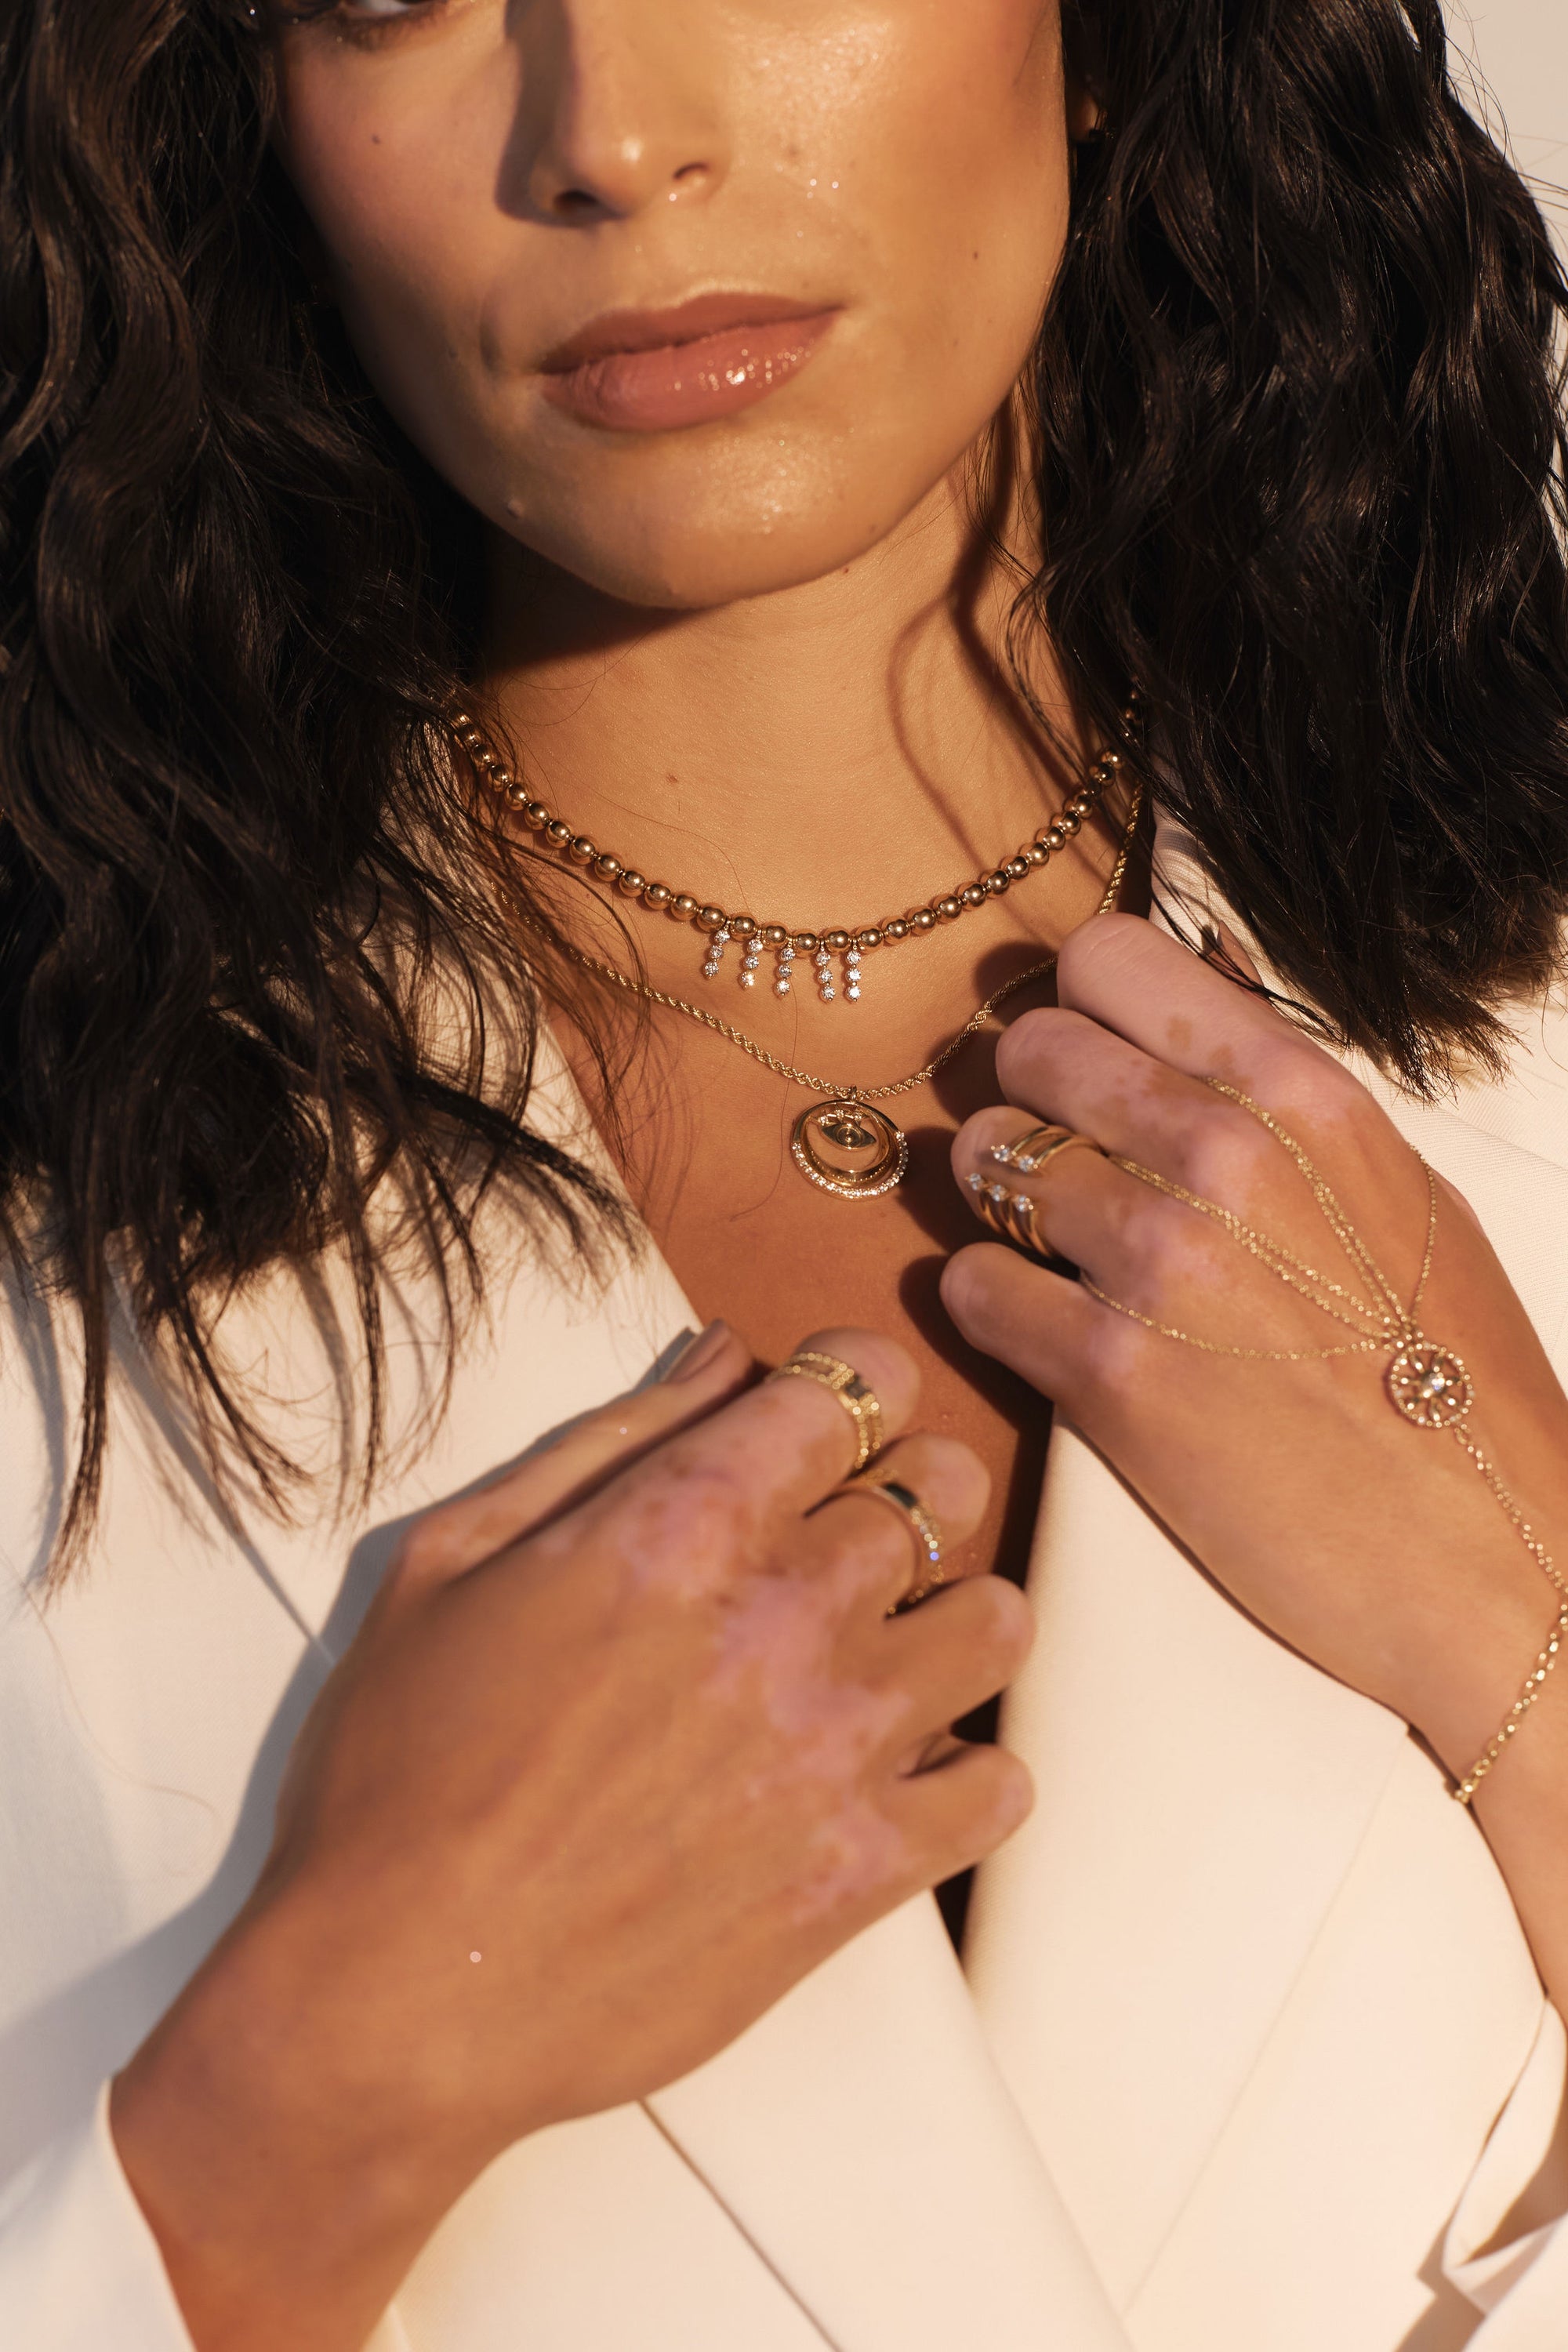 A woman with wavy dark hair wears a white blazer, multiple gold necklaces, and several gold rings. Her hands are crossed near her chest, showcasing her jewelry. The collection includes delicate chains, a sun charm pendant, and the Jazz Fingers - Yellow Gold Hand Chain from Nijma M Fine Jewelry.